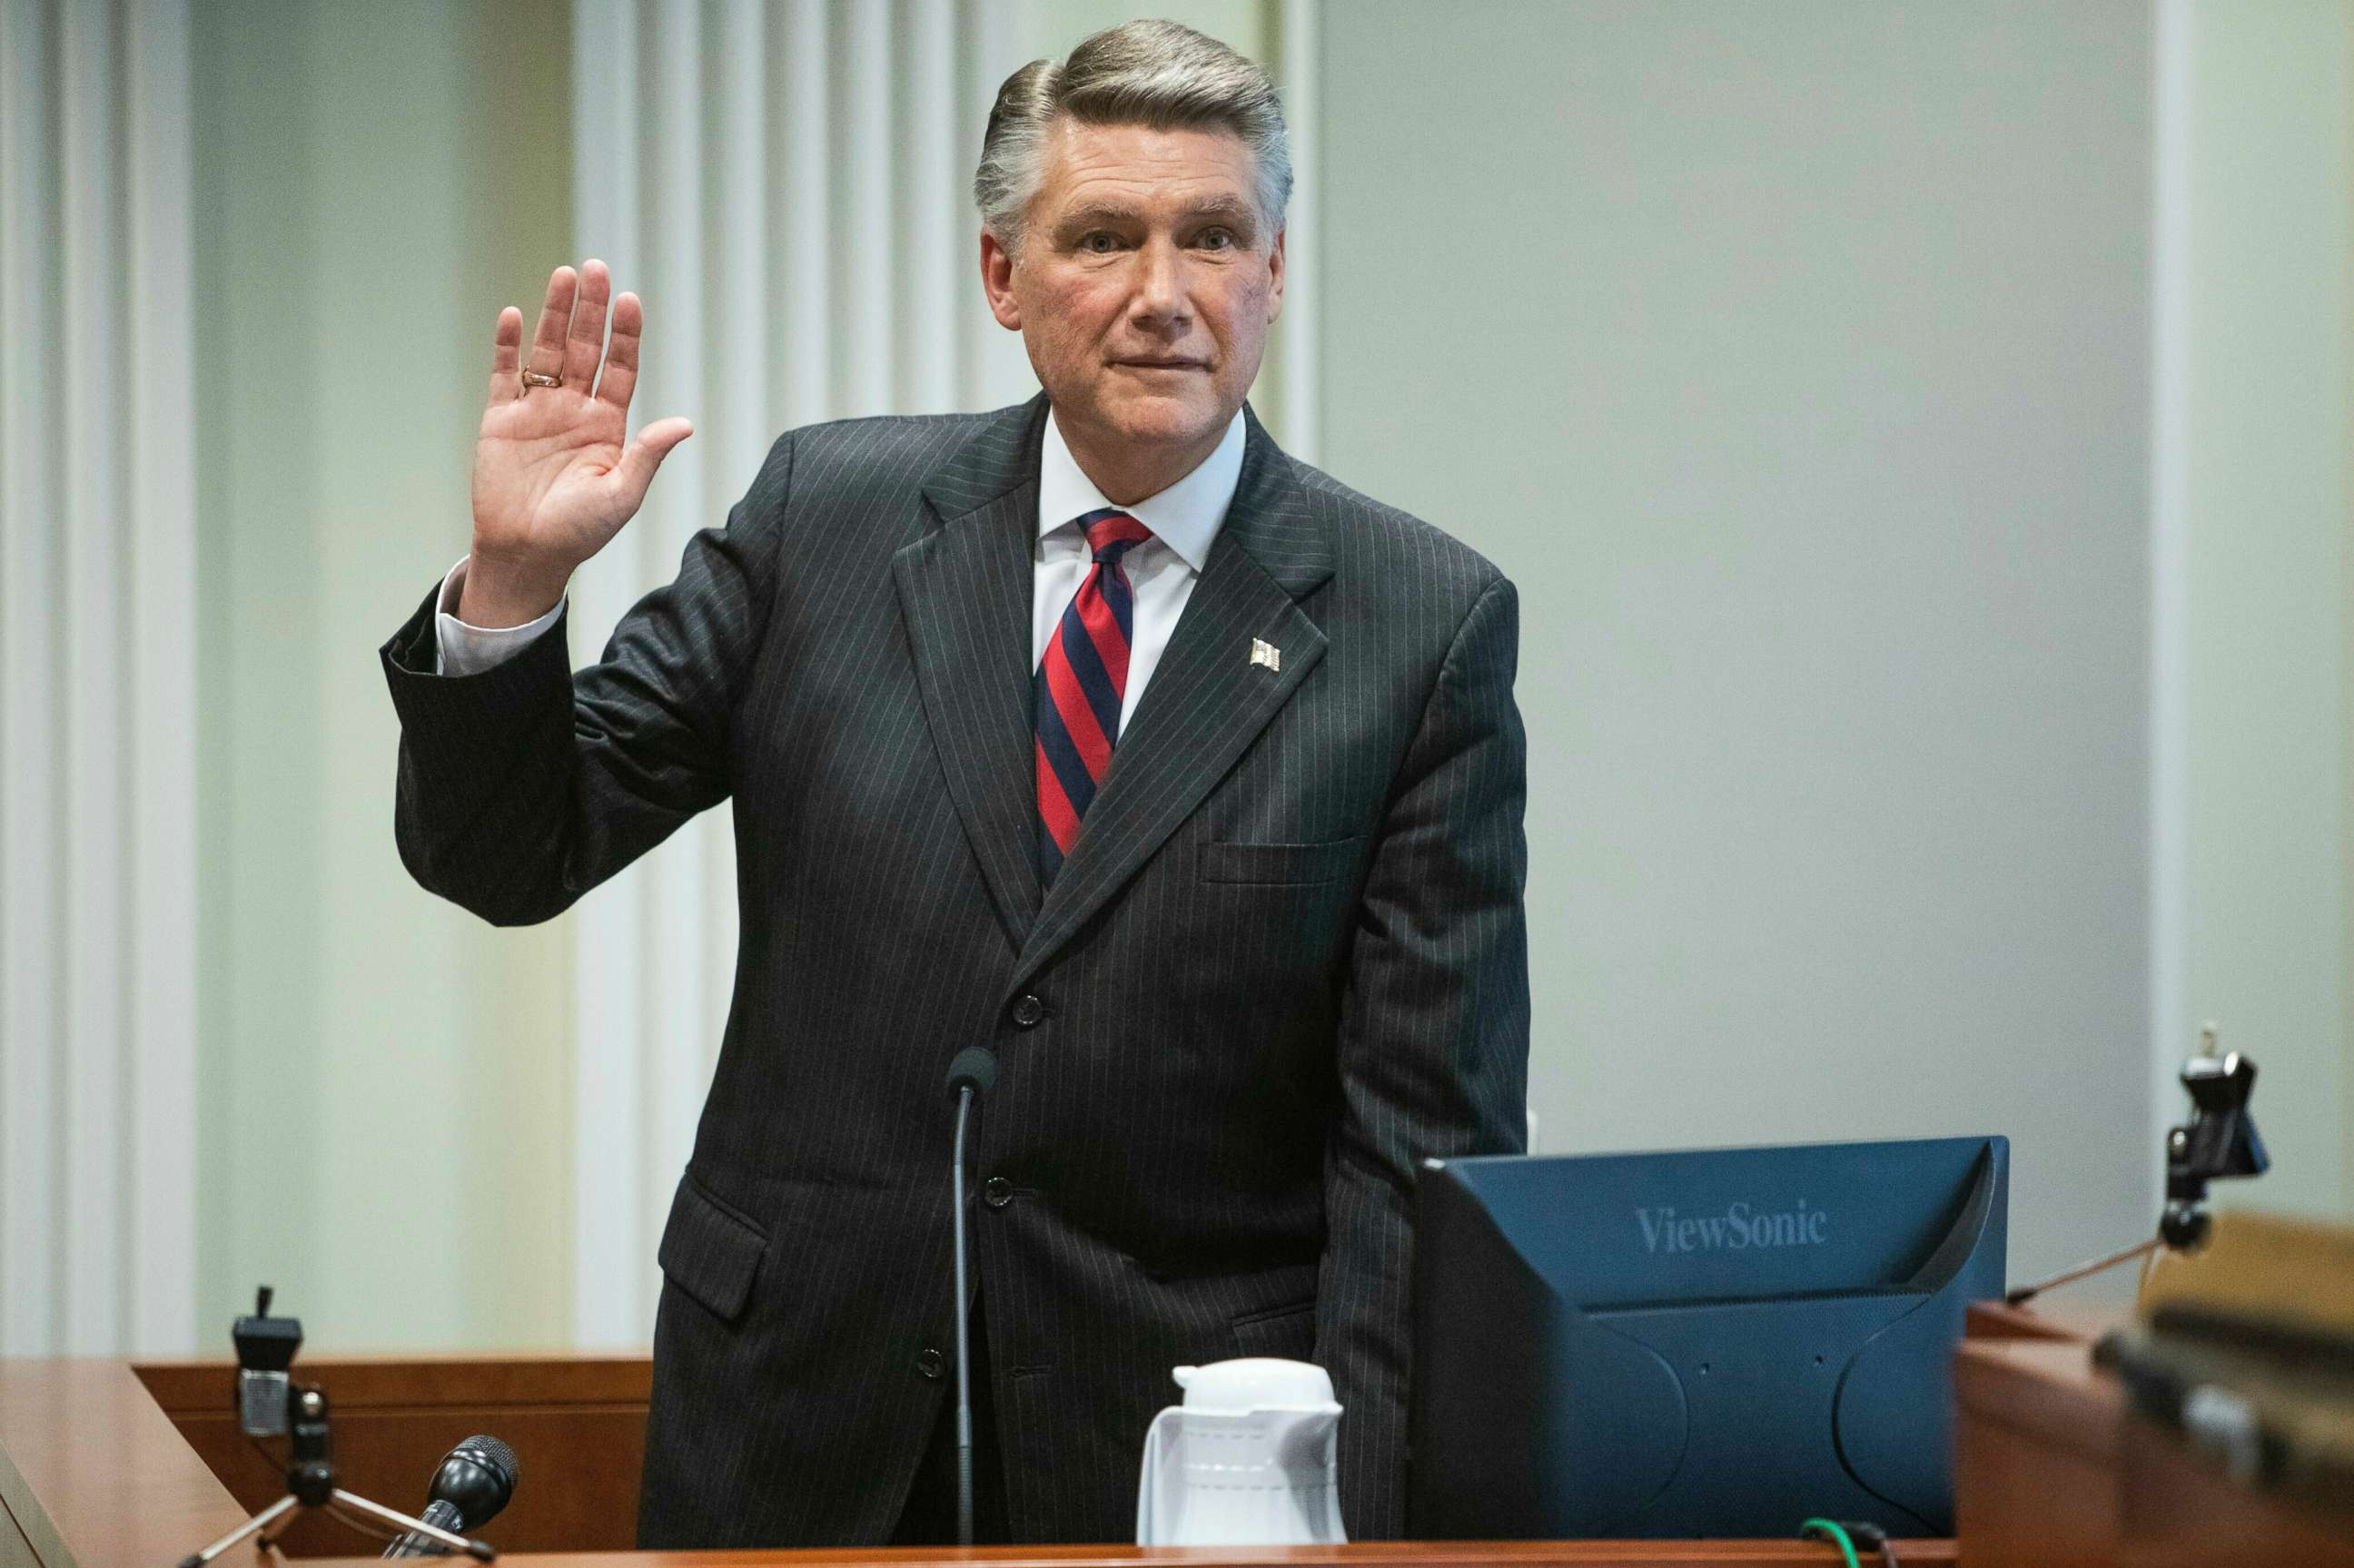 PHOTO: Mark Harris, Republican candidate in North Carolina's 9th Congressional race, prepares to testify during a hearing on voting irregularities investigation, Feb. 21, 2019, at the North Carolina State Bar in Raleigh, N.C.  